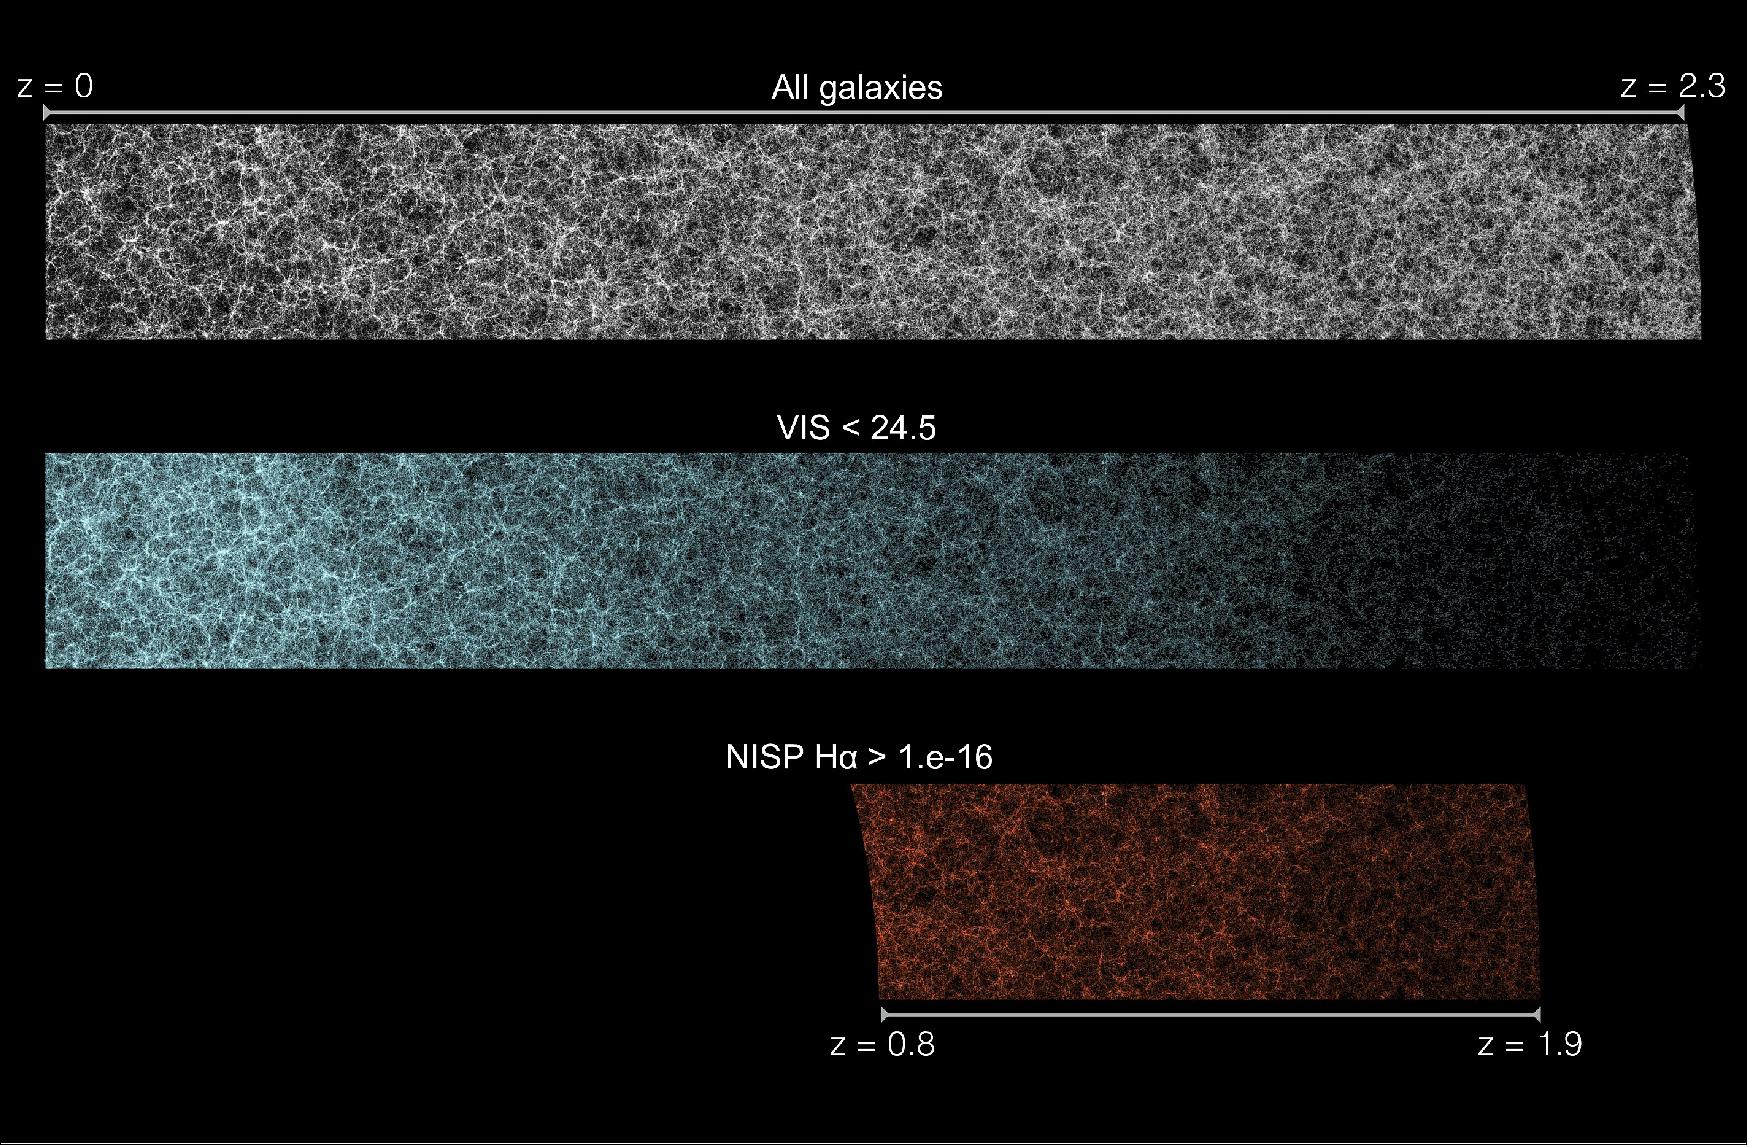 Figure 4: Euclid Flagship mockup galaxy catalog: False color images showing a small portion (0.3%) of the full light-cone simulation of mockup galaxies in the Euclid survey. Light-cone stripes extend 500 Mpc/h (vertical) x 3800 Mpc/h (horizontal axis). The 2D “pencil beam” images result from a slice of the 3D light-cone, projected from a 40 Mpc/h width (in the direction orthogonal to the image plane). From top to bottom, panels display the full sample of galaxies in the mockup, and the sub-samples expected from observations in the VIS and NISP-Halpha channels. The galaxy mockup has been produced using a Halo Occupation Distribution pipeline developed by the Institut de Ciències de l’Espai (ICE) and Port d’Informació Científica (PIC) in Barcelona, it is based on the 2 trillion dark-matter particle Flagship run produced by U. Zurich (image credit: J. Carretero/P. Tallada/S. Serrano for ICE/PIC/U.Zurich and the Euclid Consortium Cosmological Simulations SWG)